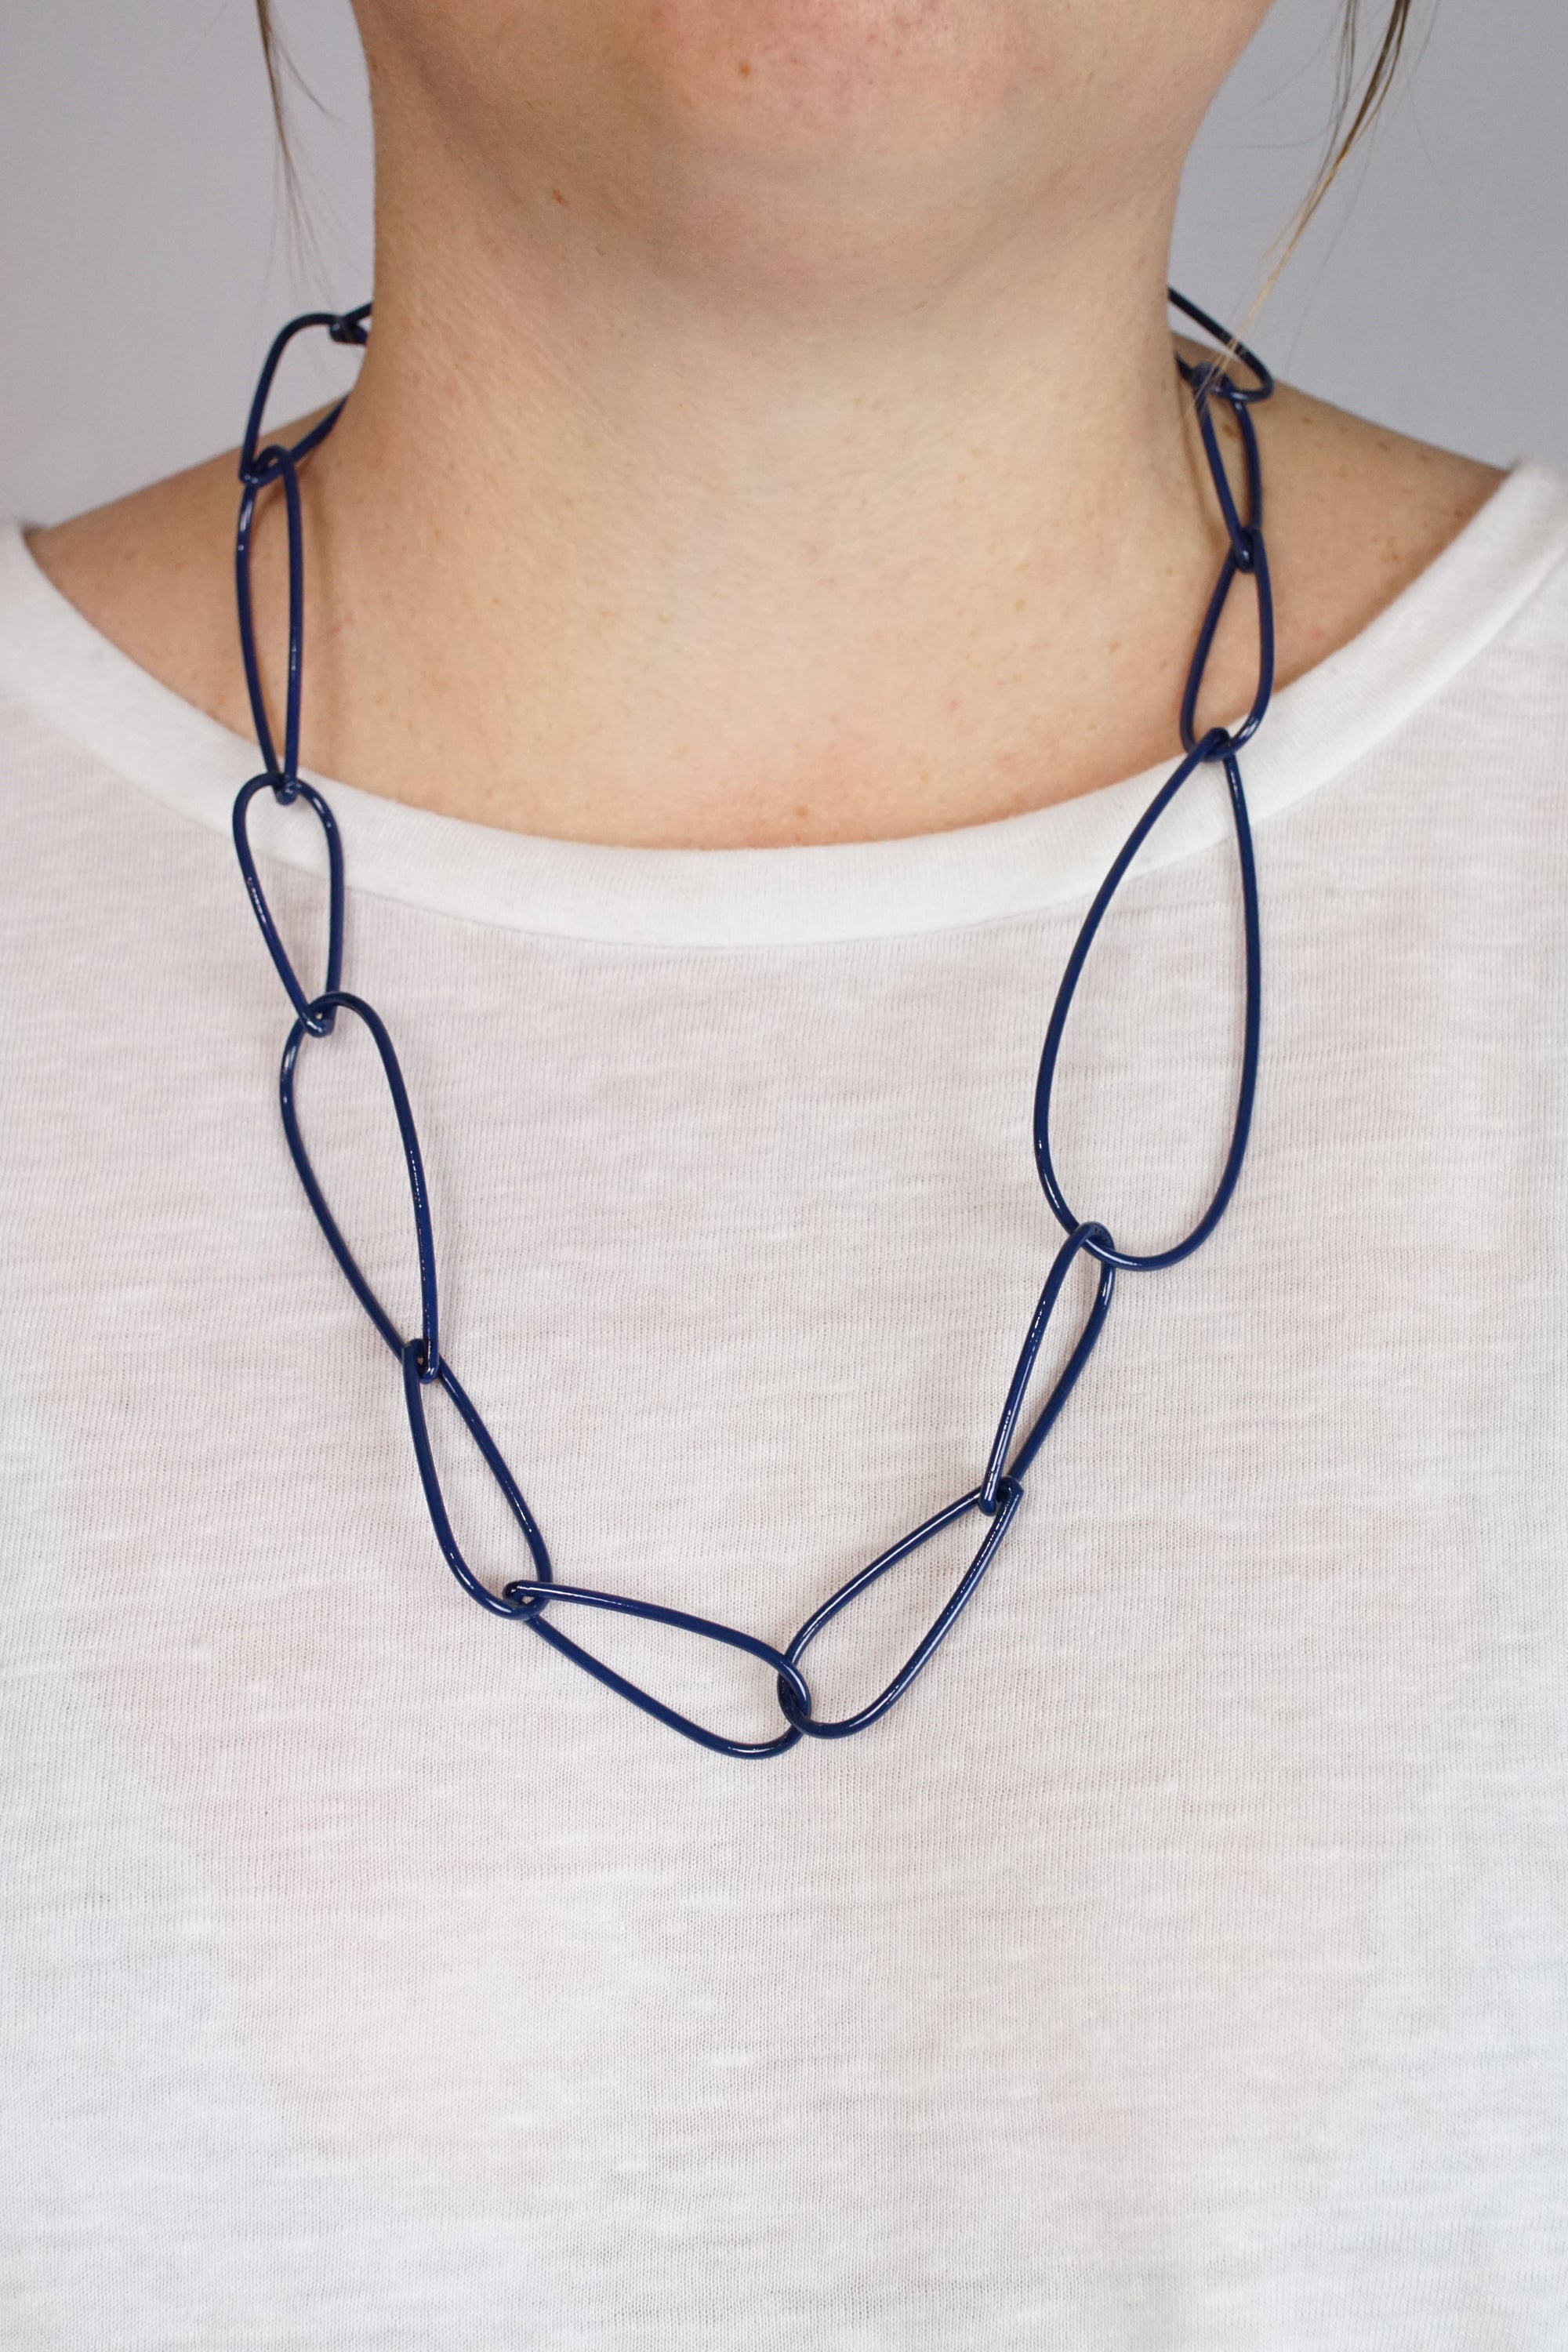 Modular Necklace No. 4 in Blue Sapphire